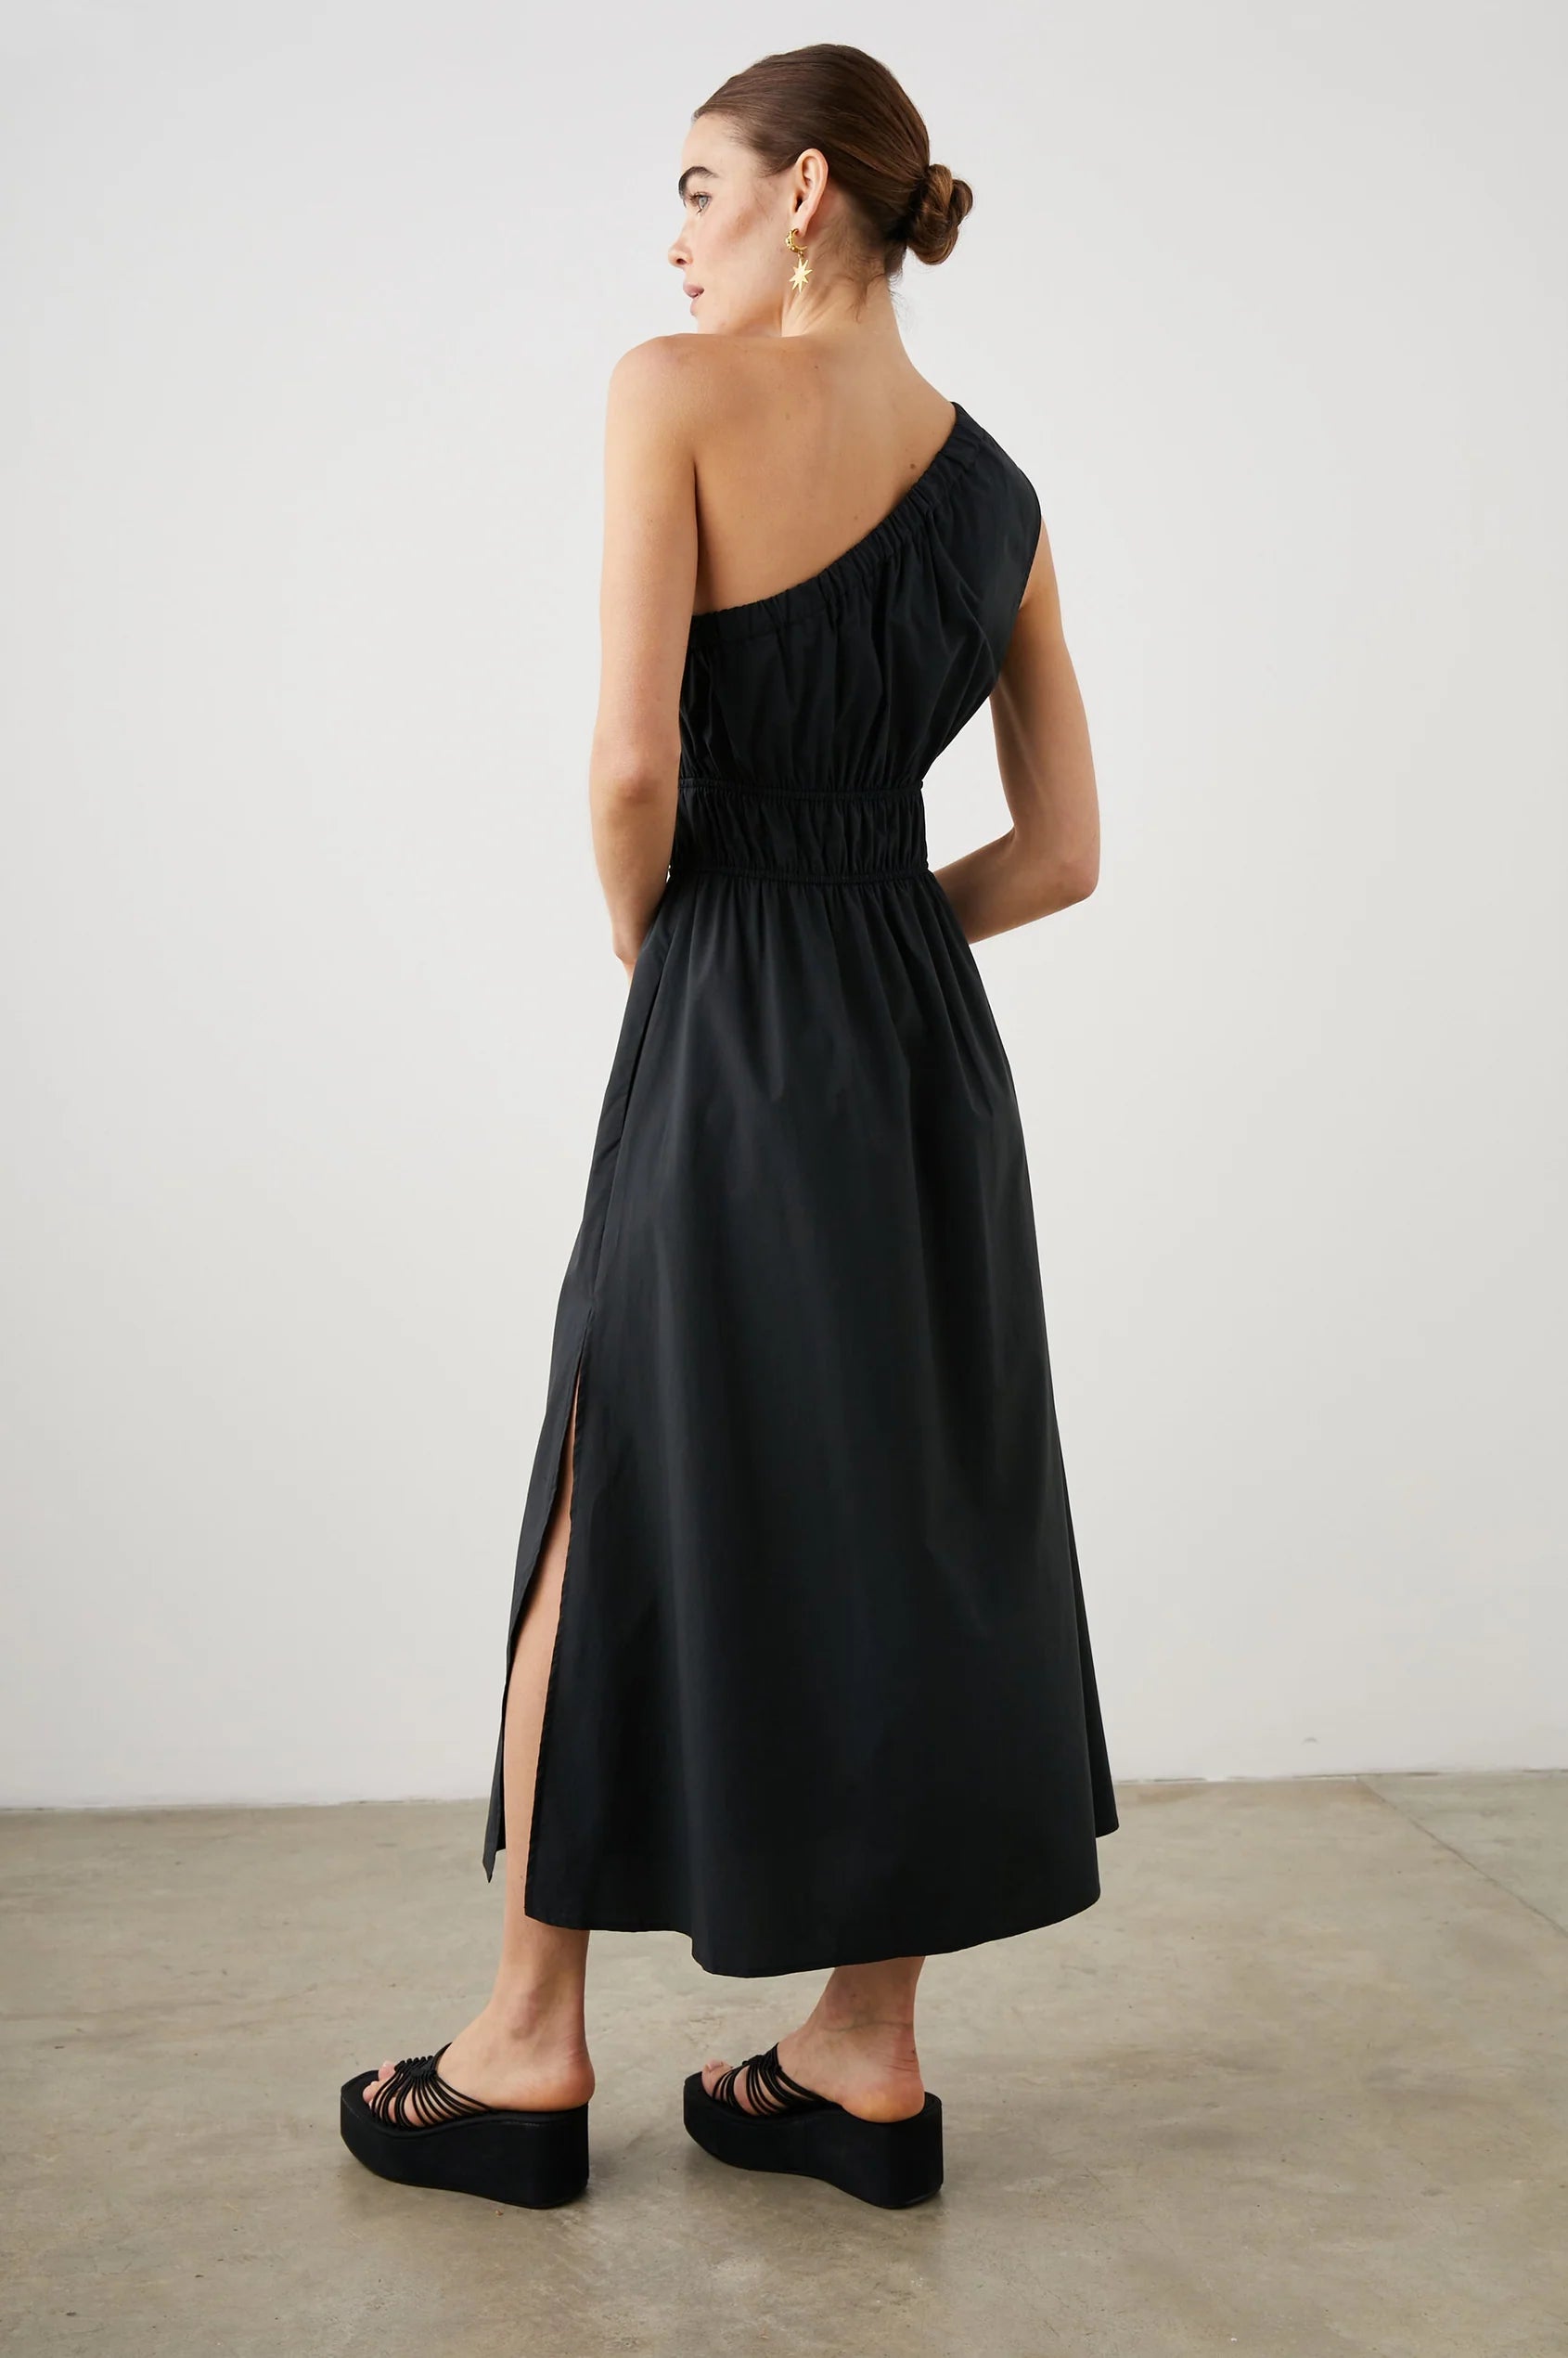 One shoulder black dress with side split and double elasticated waistband